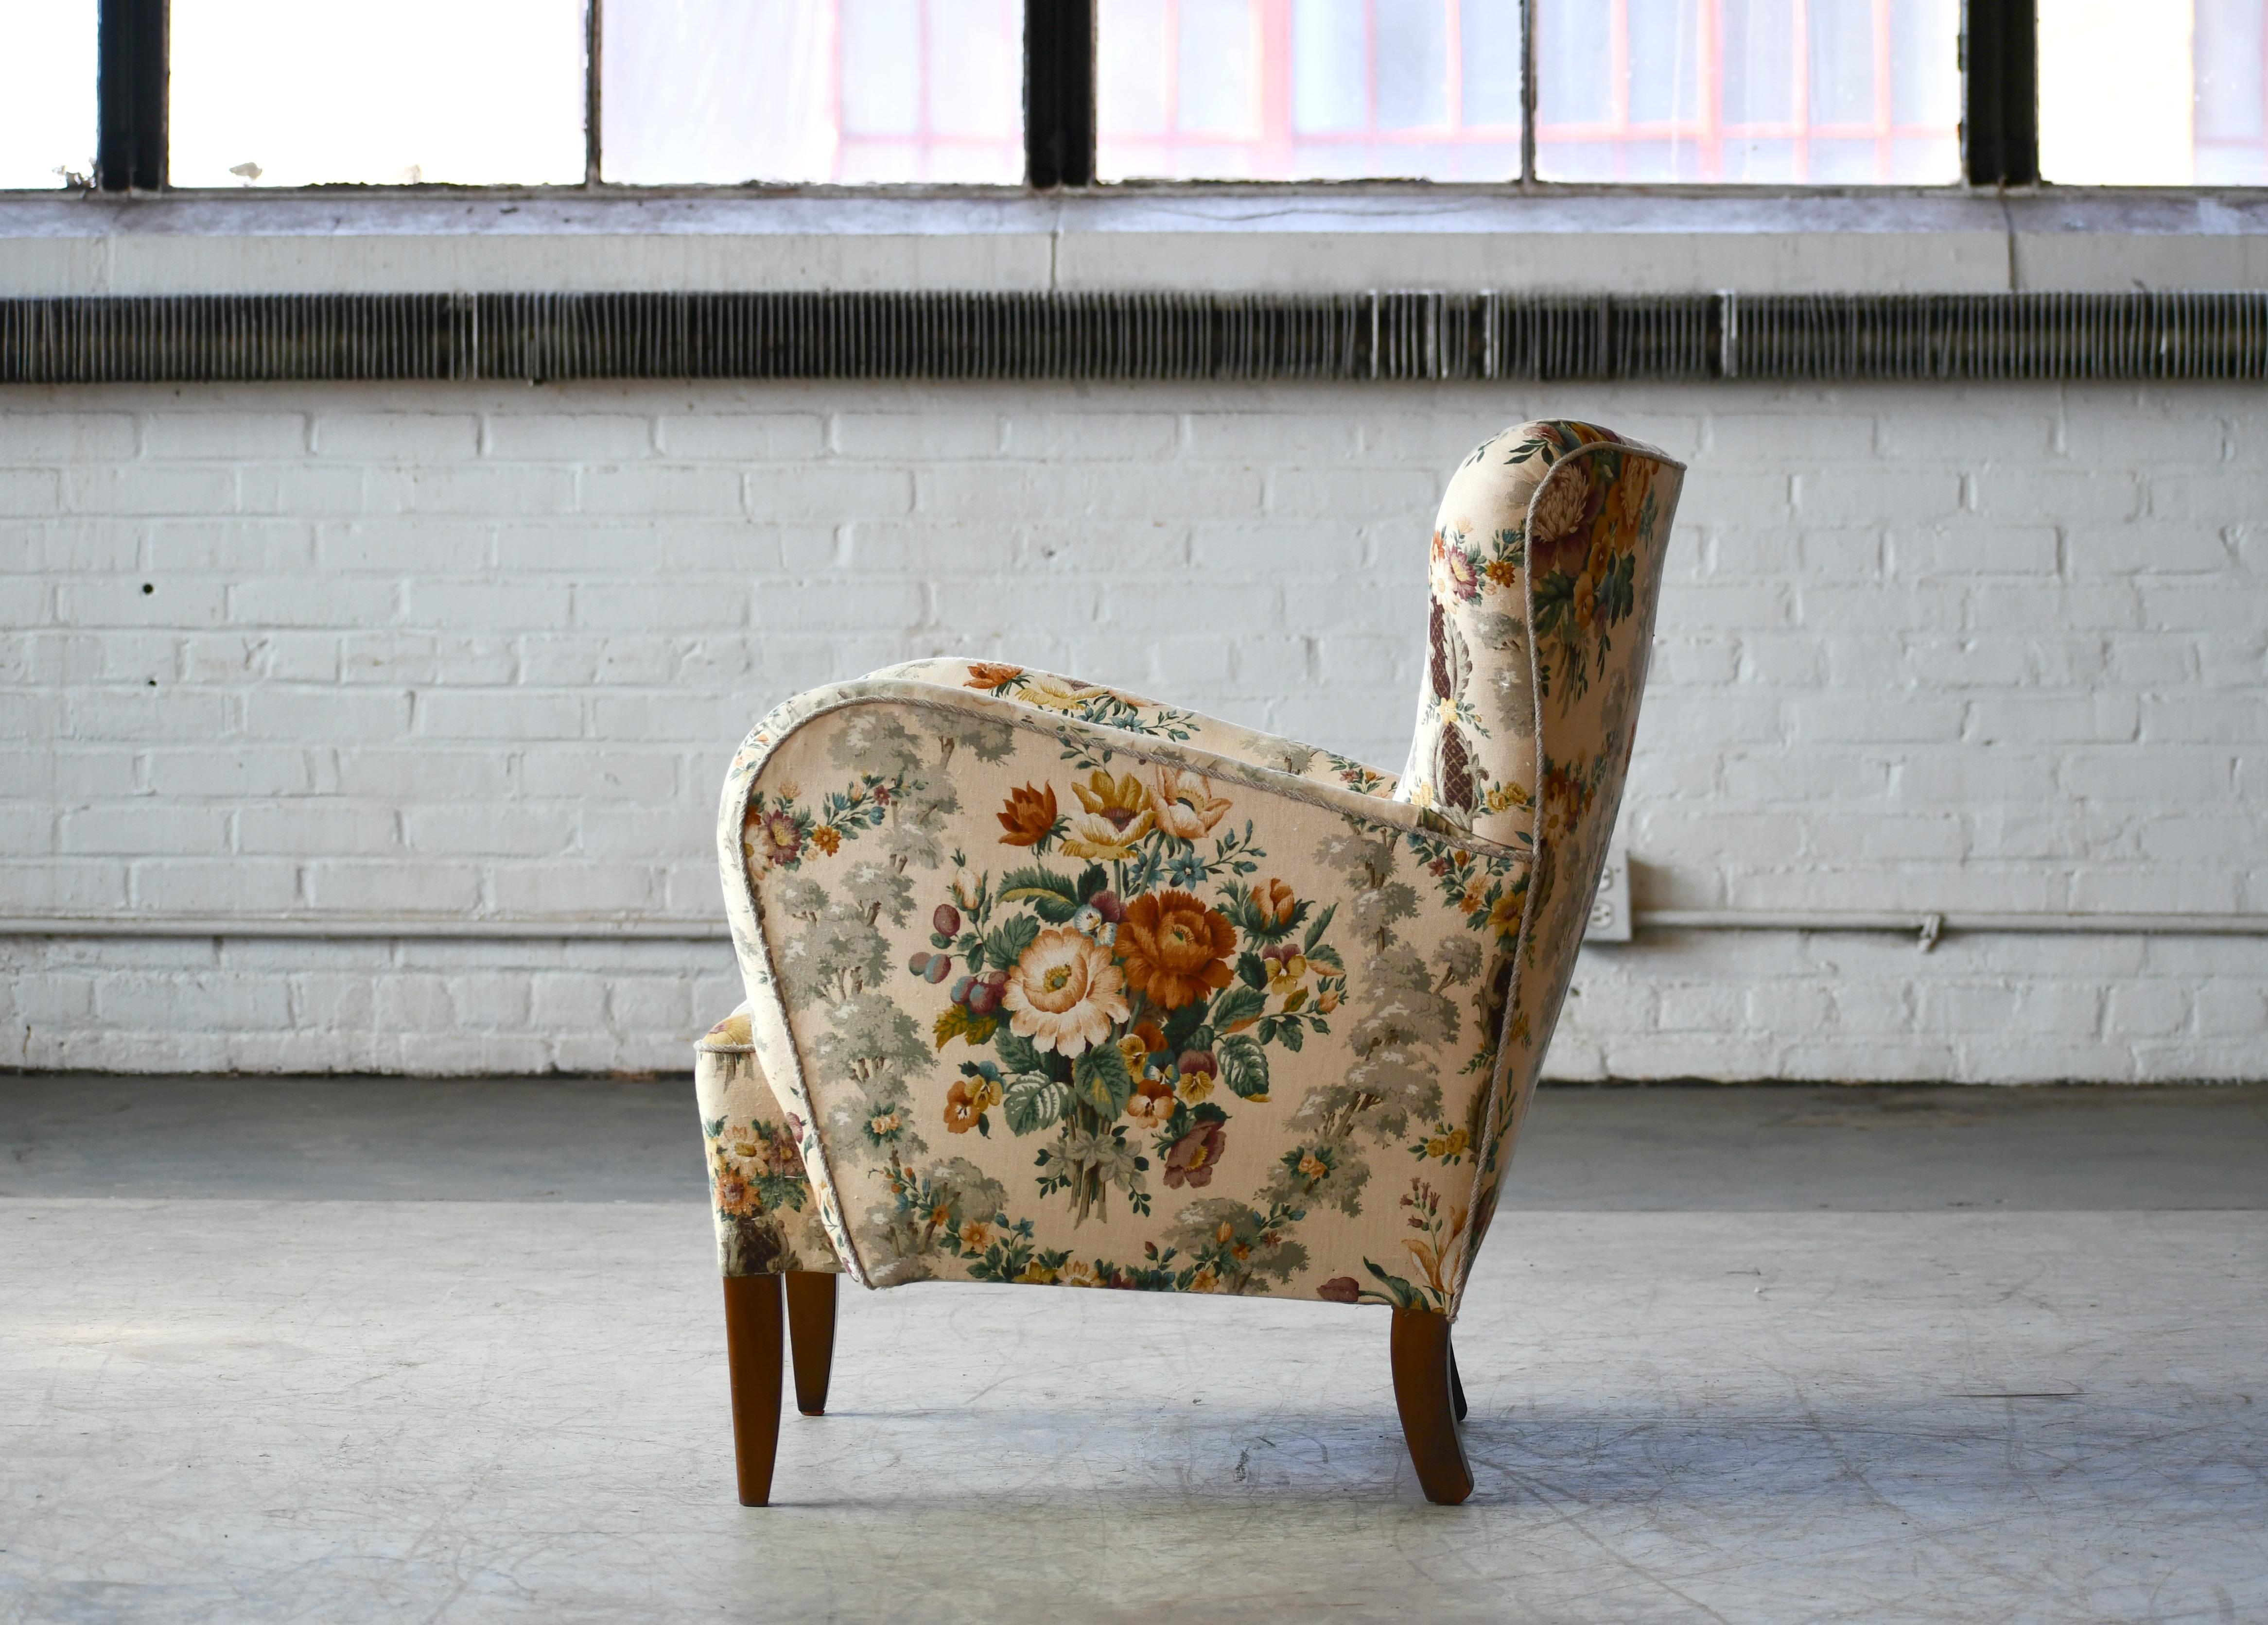 Danish Midcentury 1940s Flemming Lassen Style Lounge Chair in Floral Fabric 1